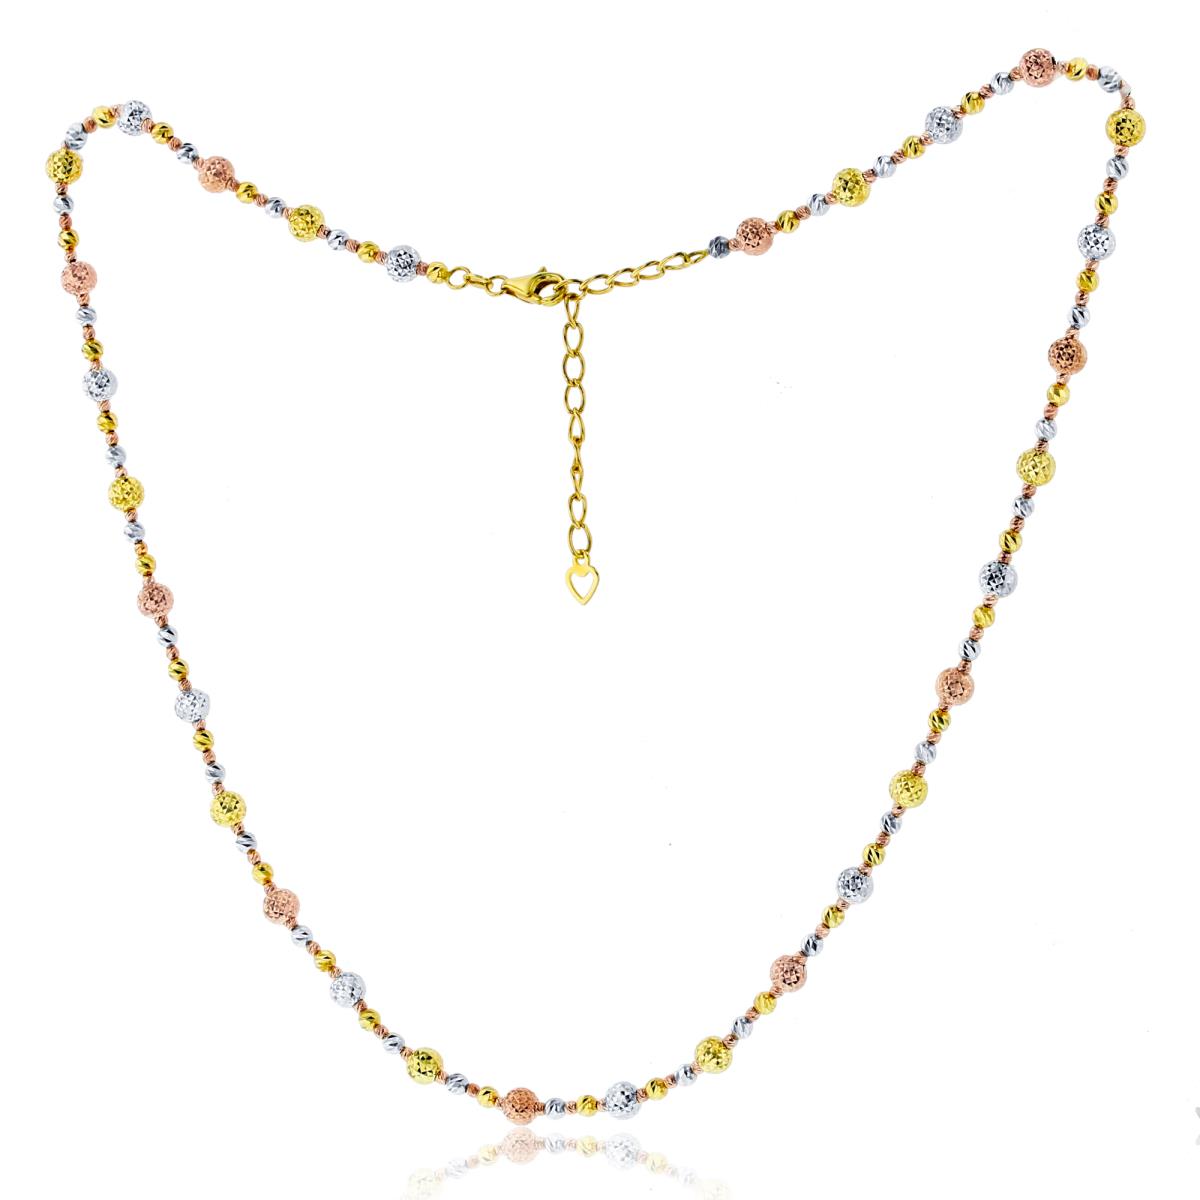 14k Gold Tri-Color Diamond Cut Bead 18" Necklace with 2 inch Extender